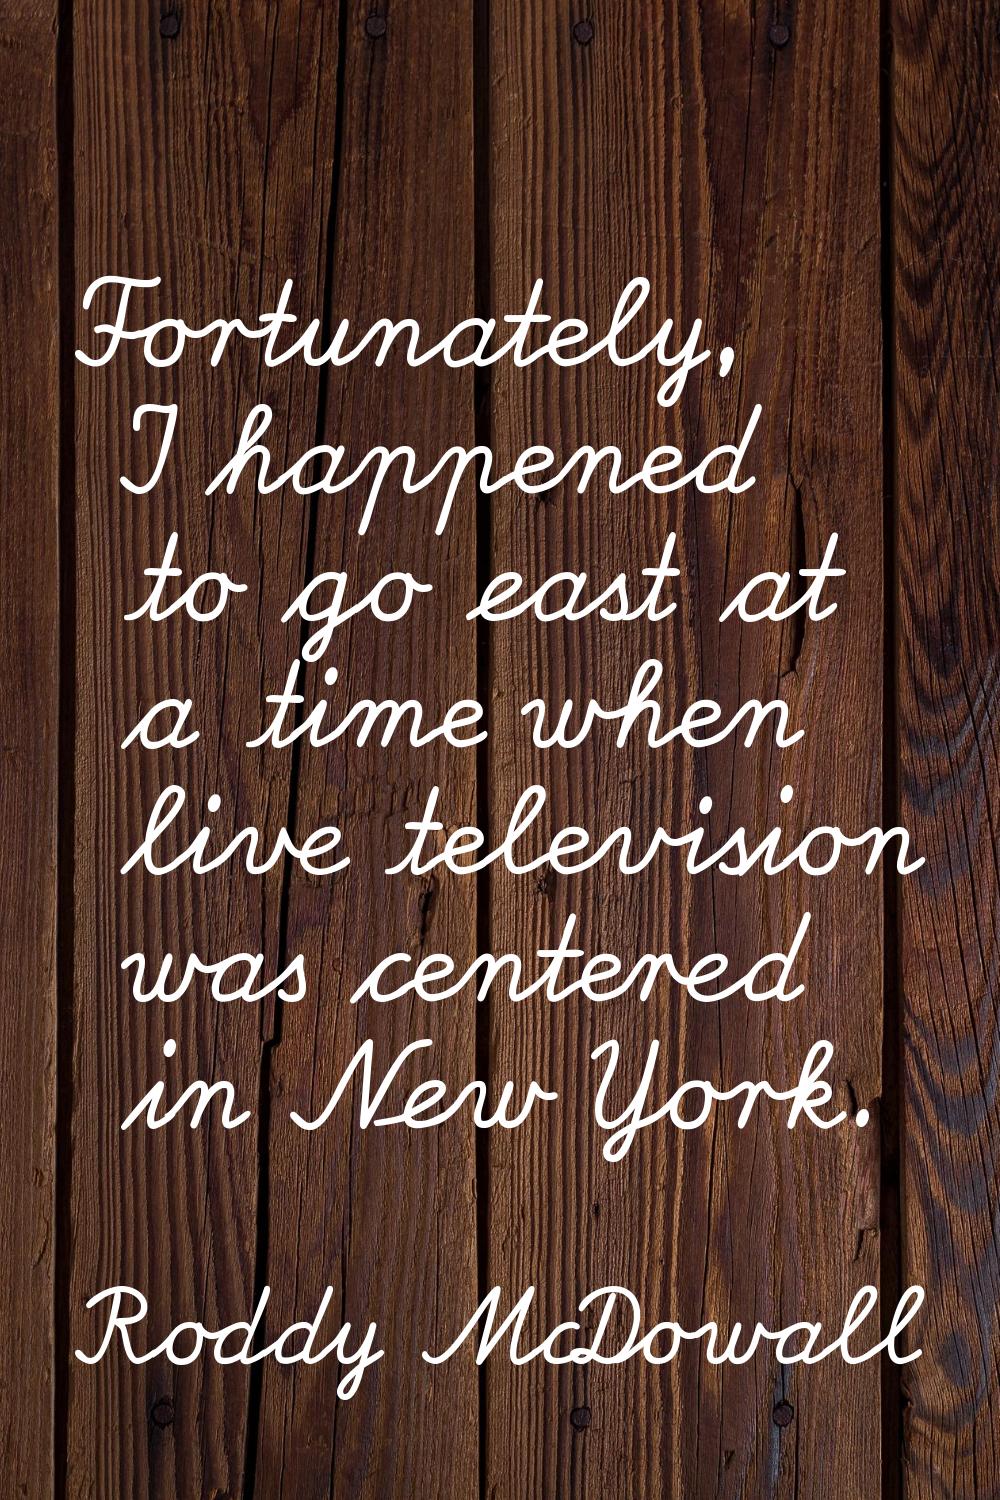 Fortunately, I happened to go east at a time when live television was centered in New York.